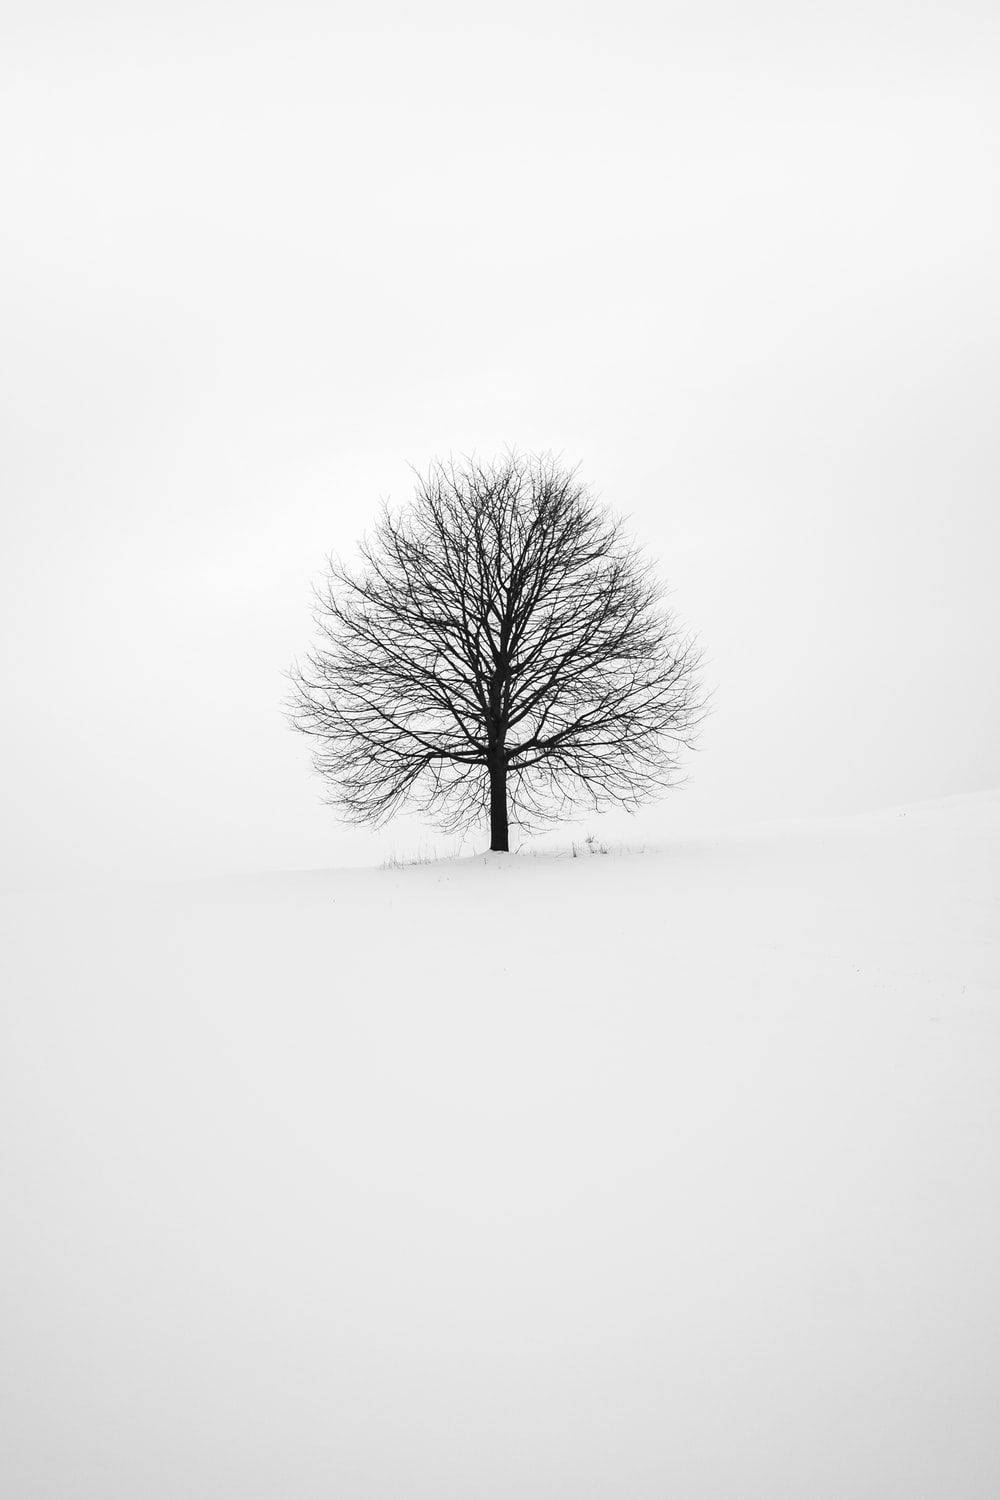 Solemn White Tree Sketch On A Blank Background Wallpaper